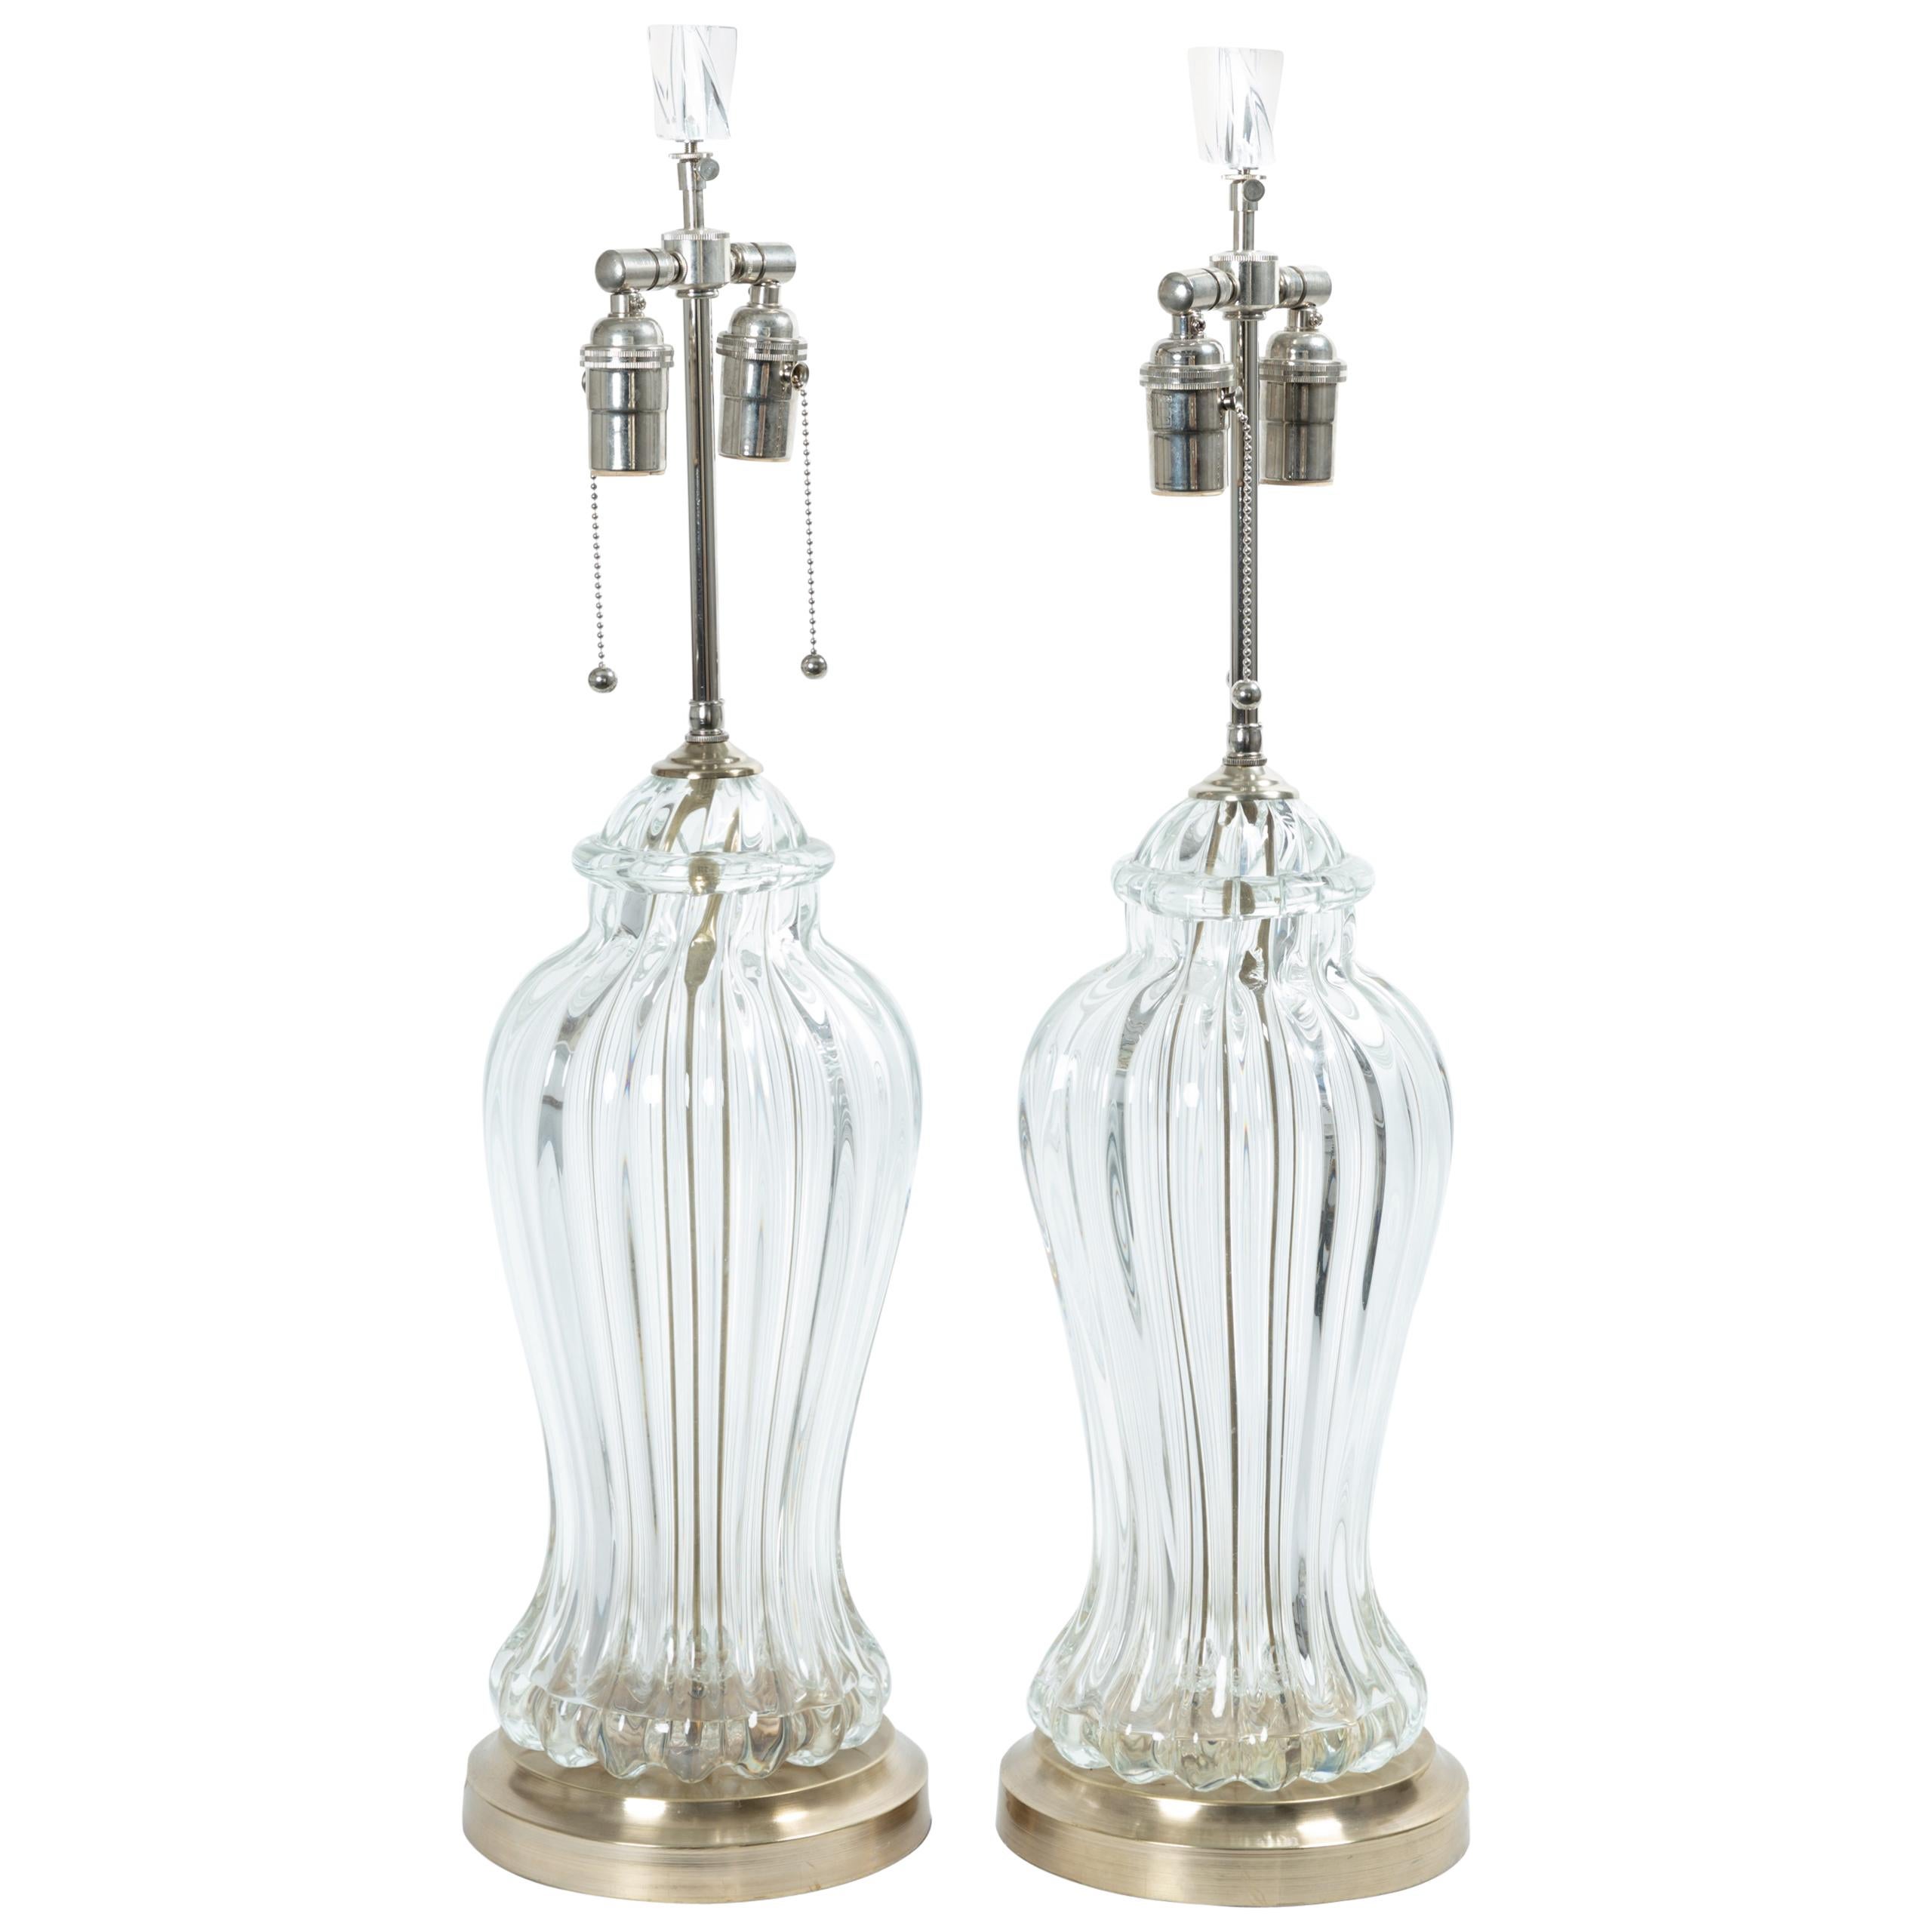 Pair of Fluted Clear Murano Glass Table Lamps with Nickel Detail